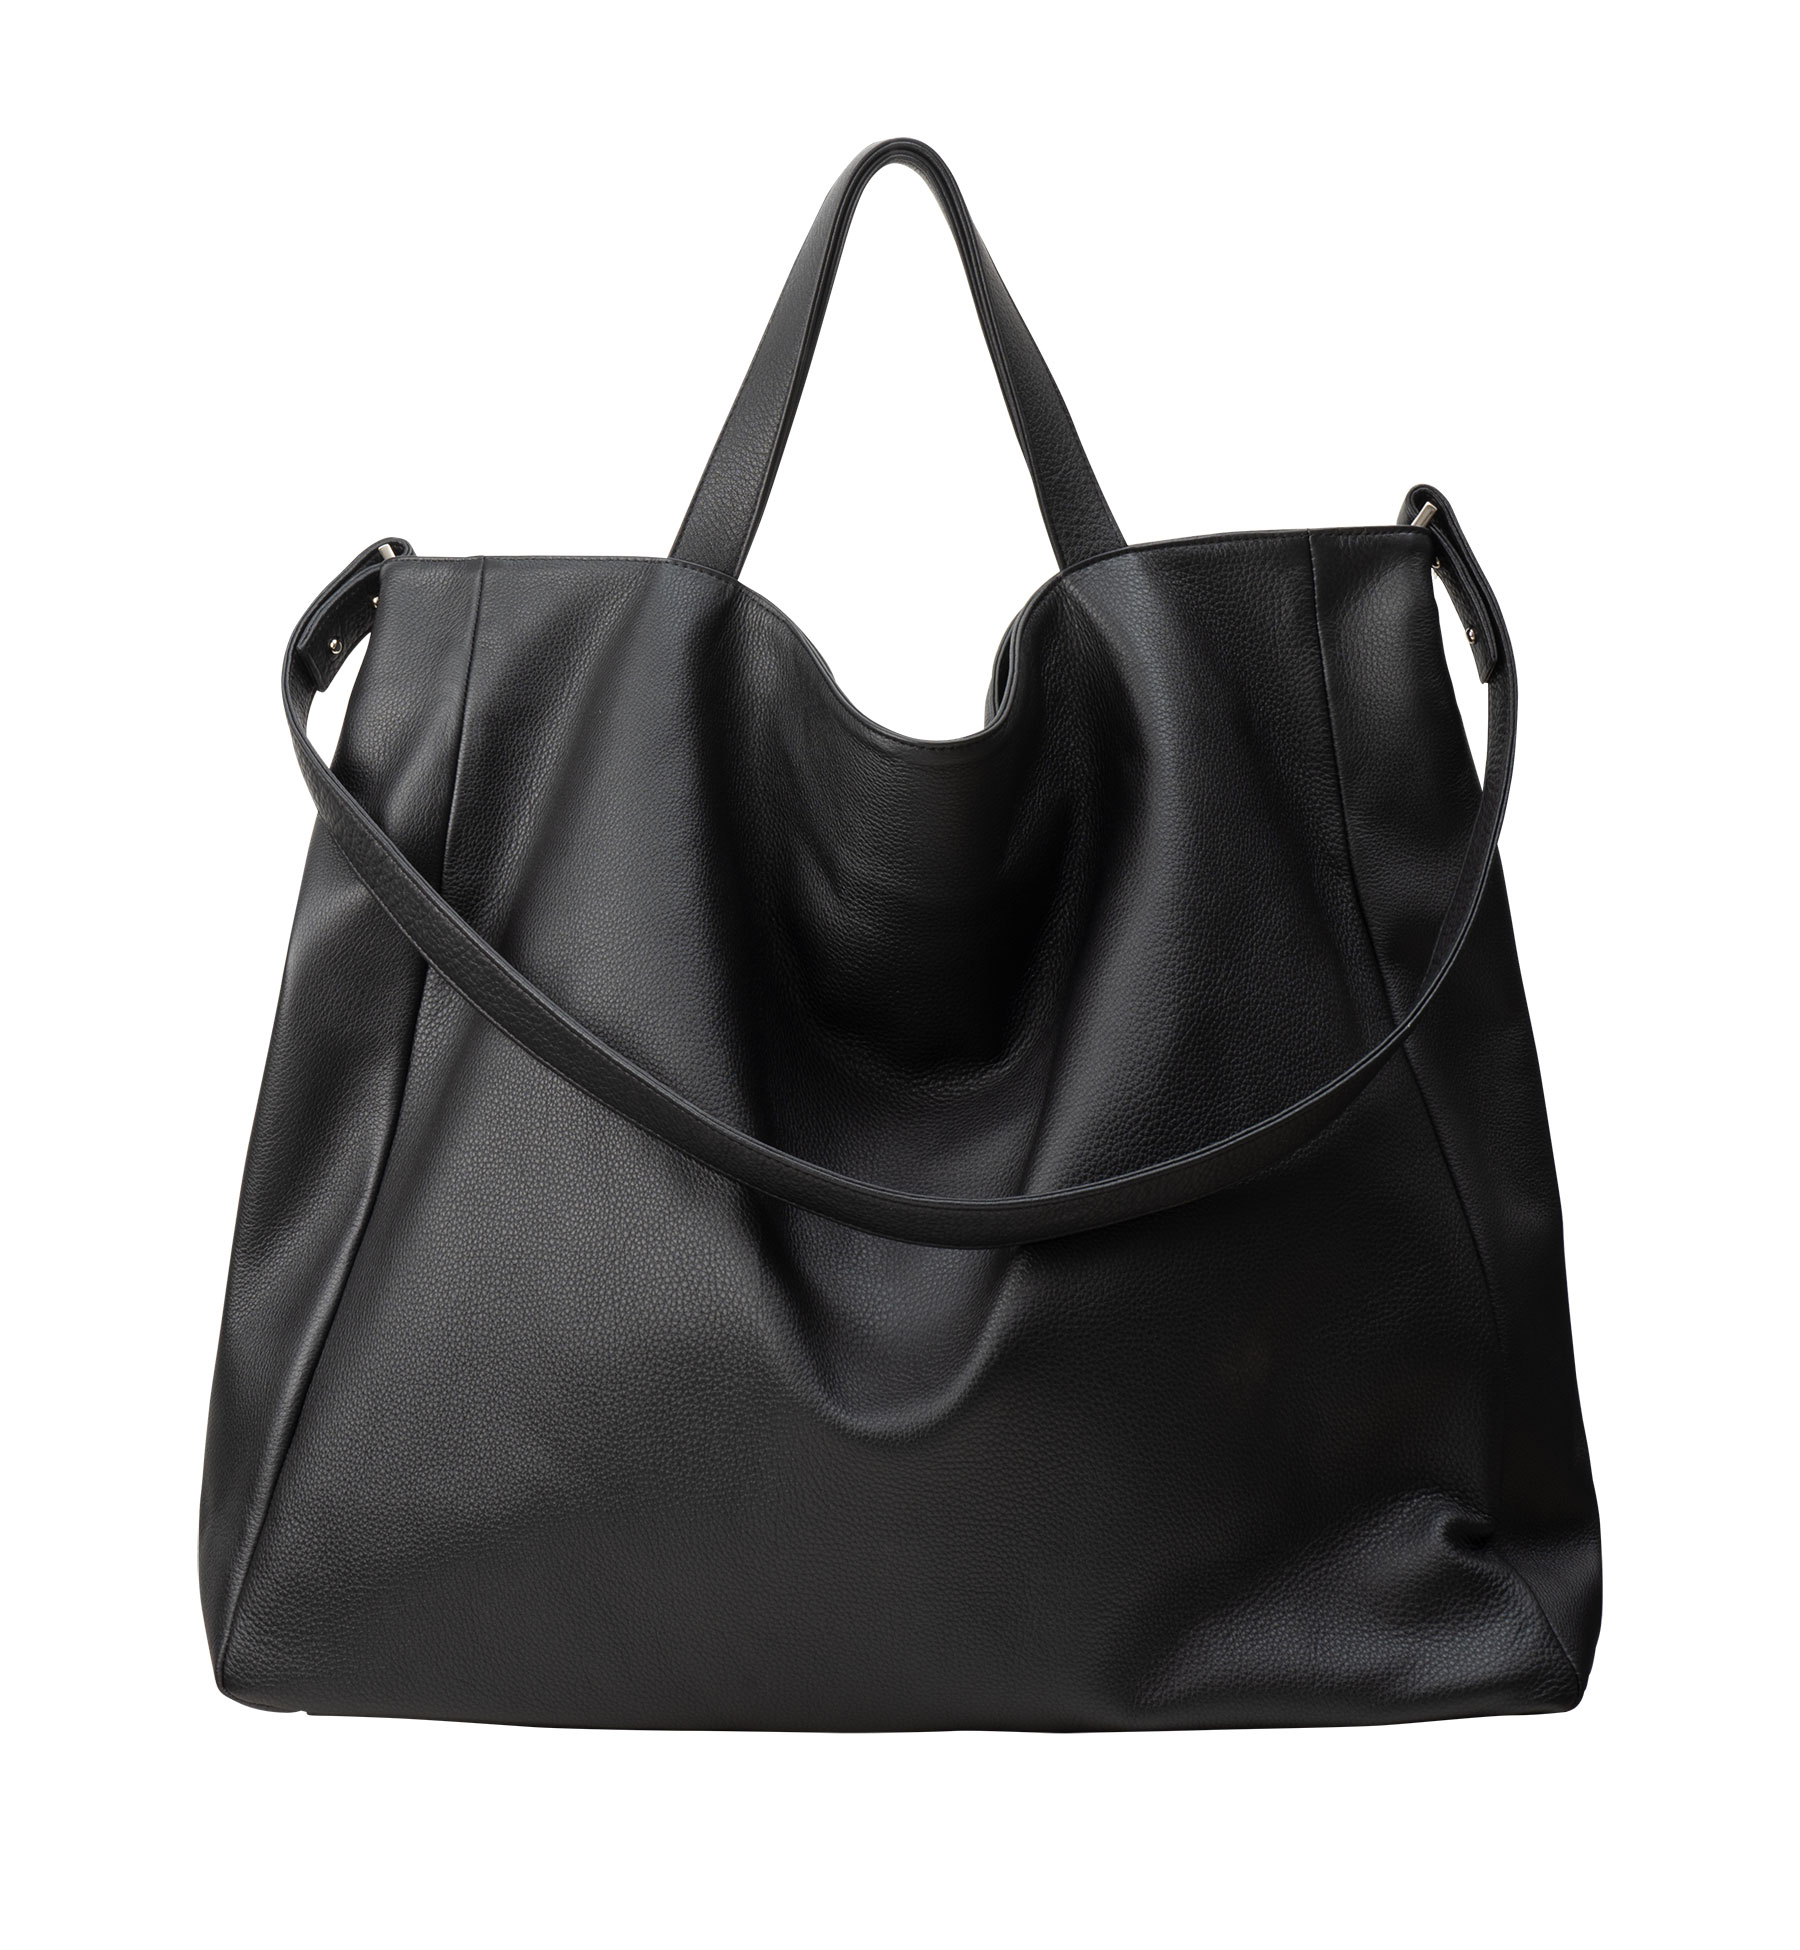 Black Natural Leather tote bag with Zipper. Architect bag in Black